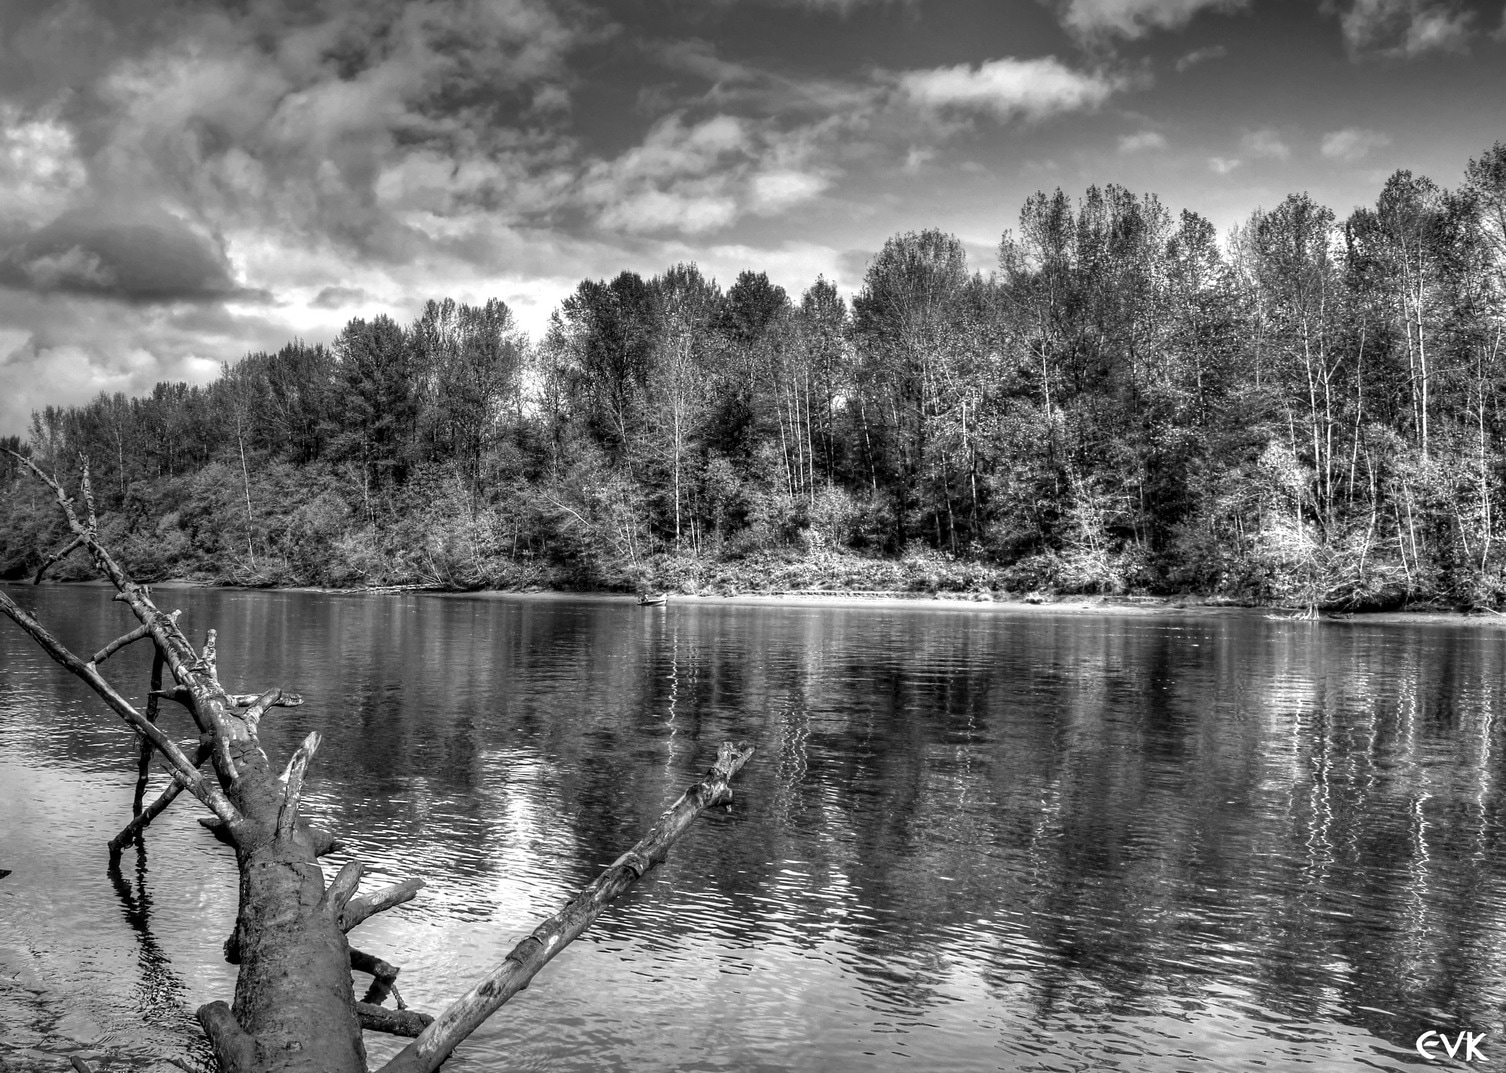 grayscale image of forest and body of water